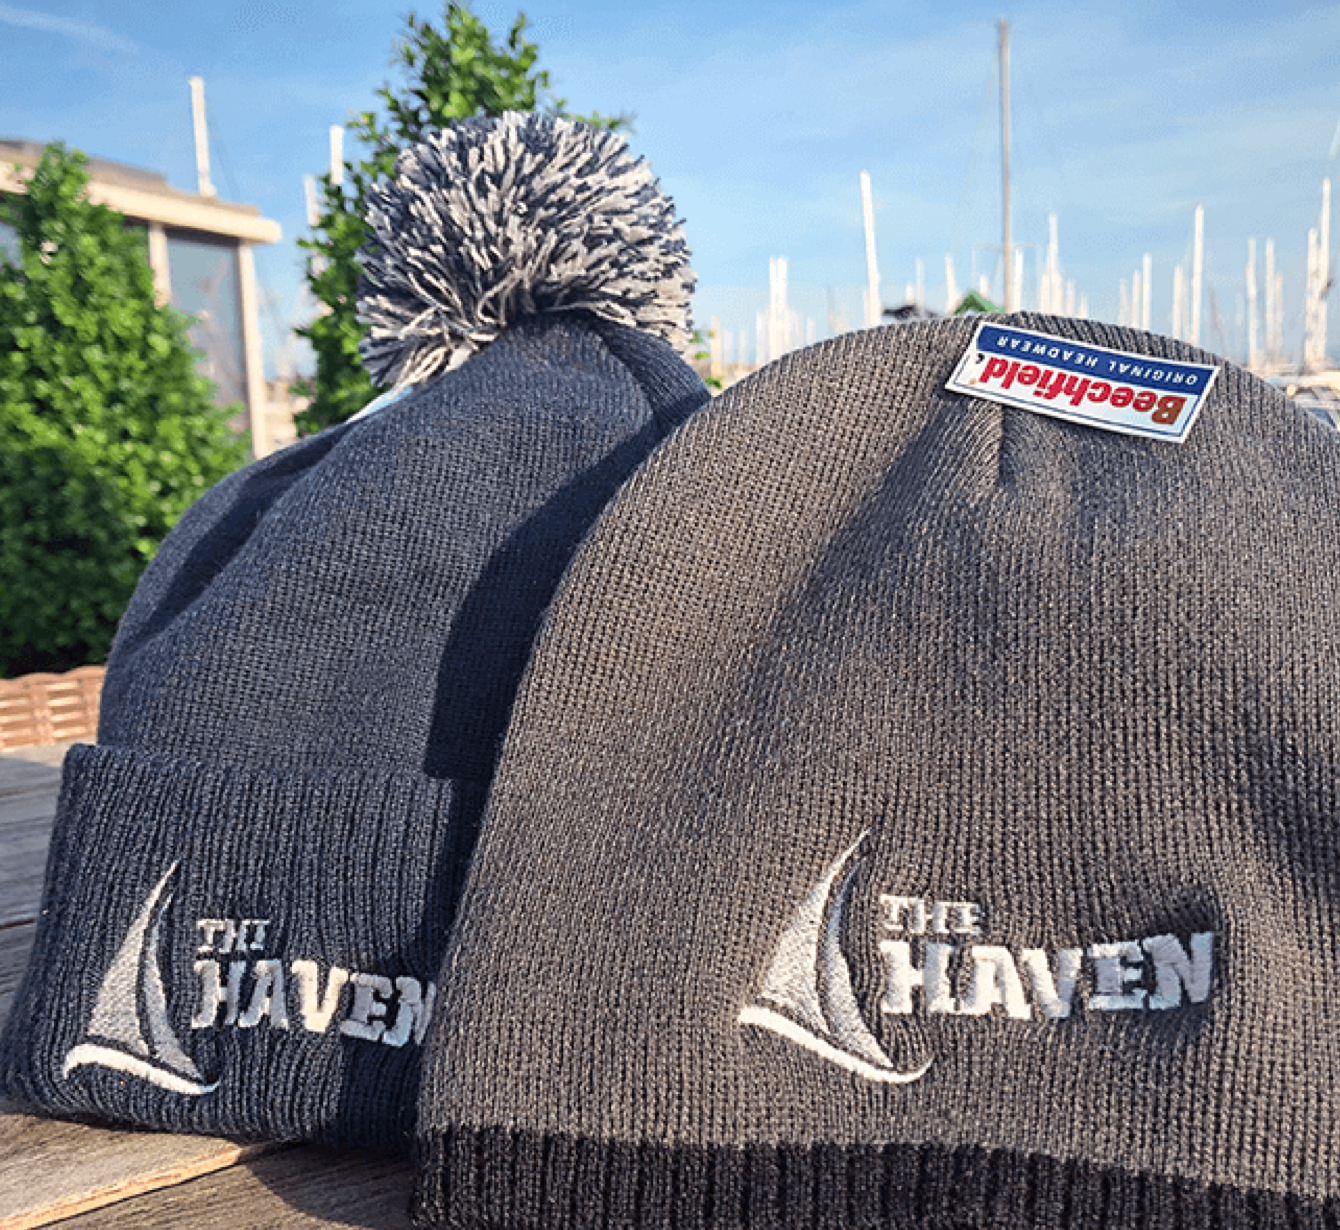 The Haven Bar and Restaurant beanies and bobble hats.